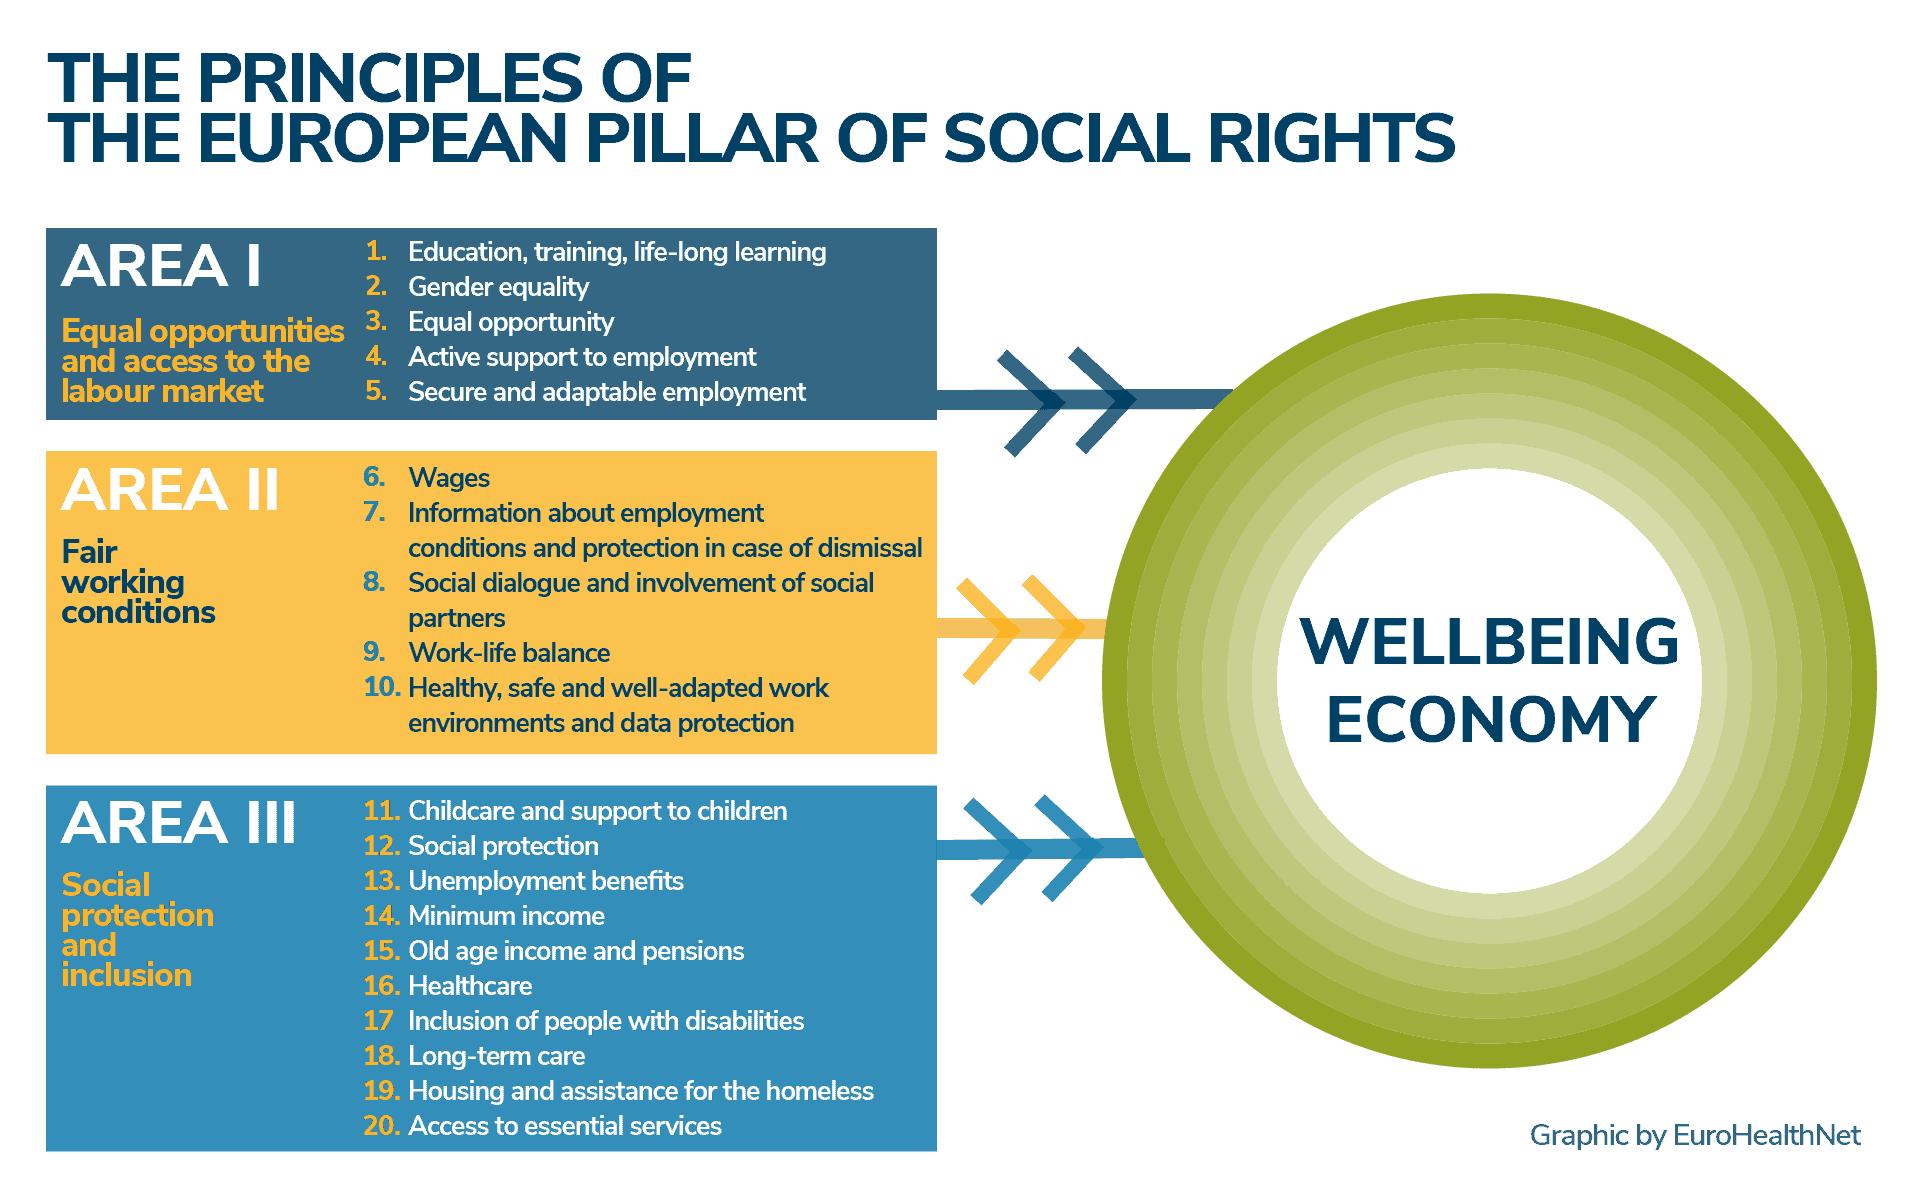 The European Pillar of Social Rights (EPSR) sets out principles and rights to support fair and well-functioning labour markets as well as social protection and inclusion everywhere in Europe. The principles of the Pillar feed into the Economy of Wellbeing.